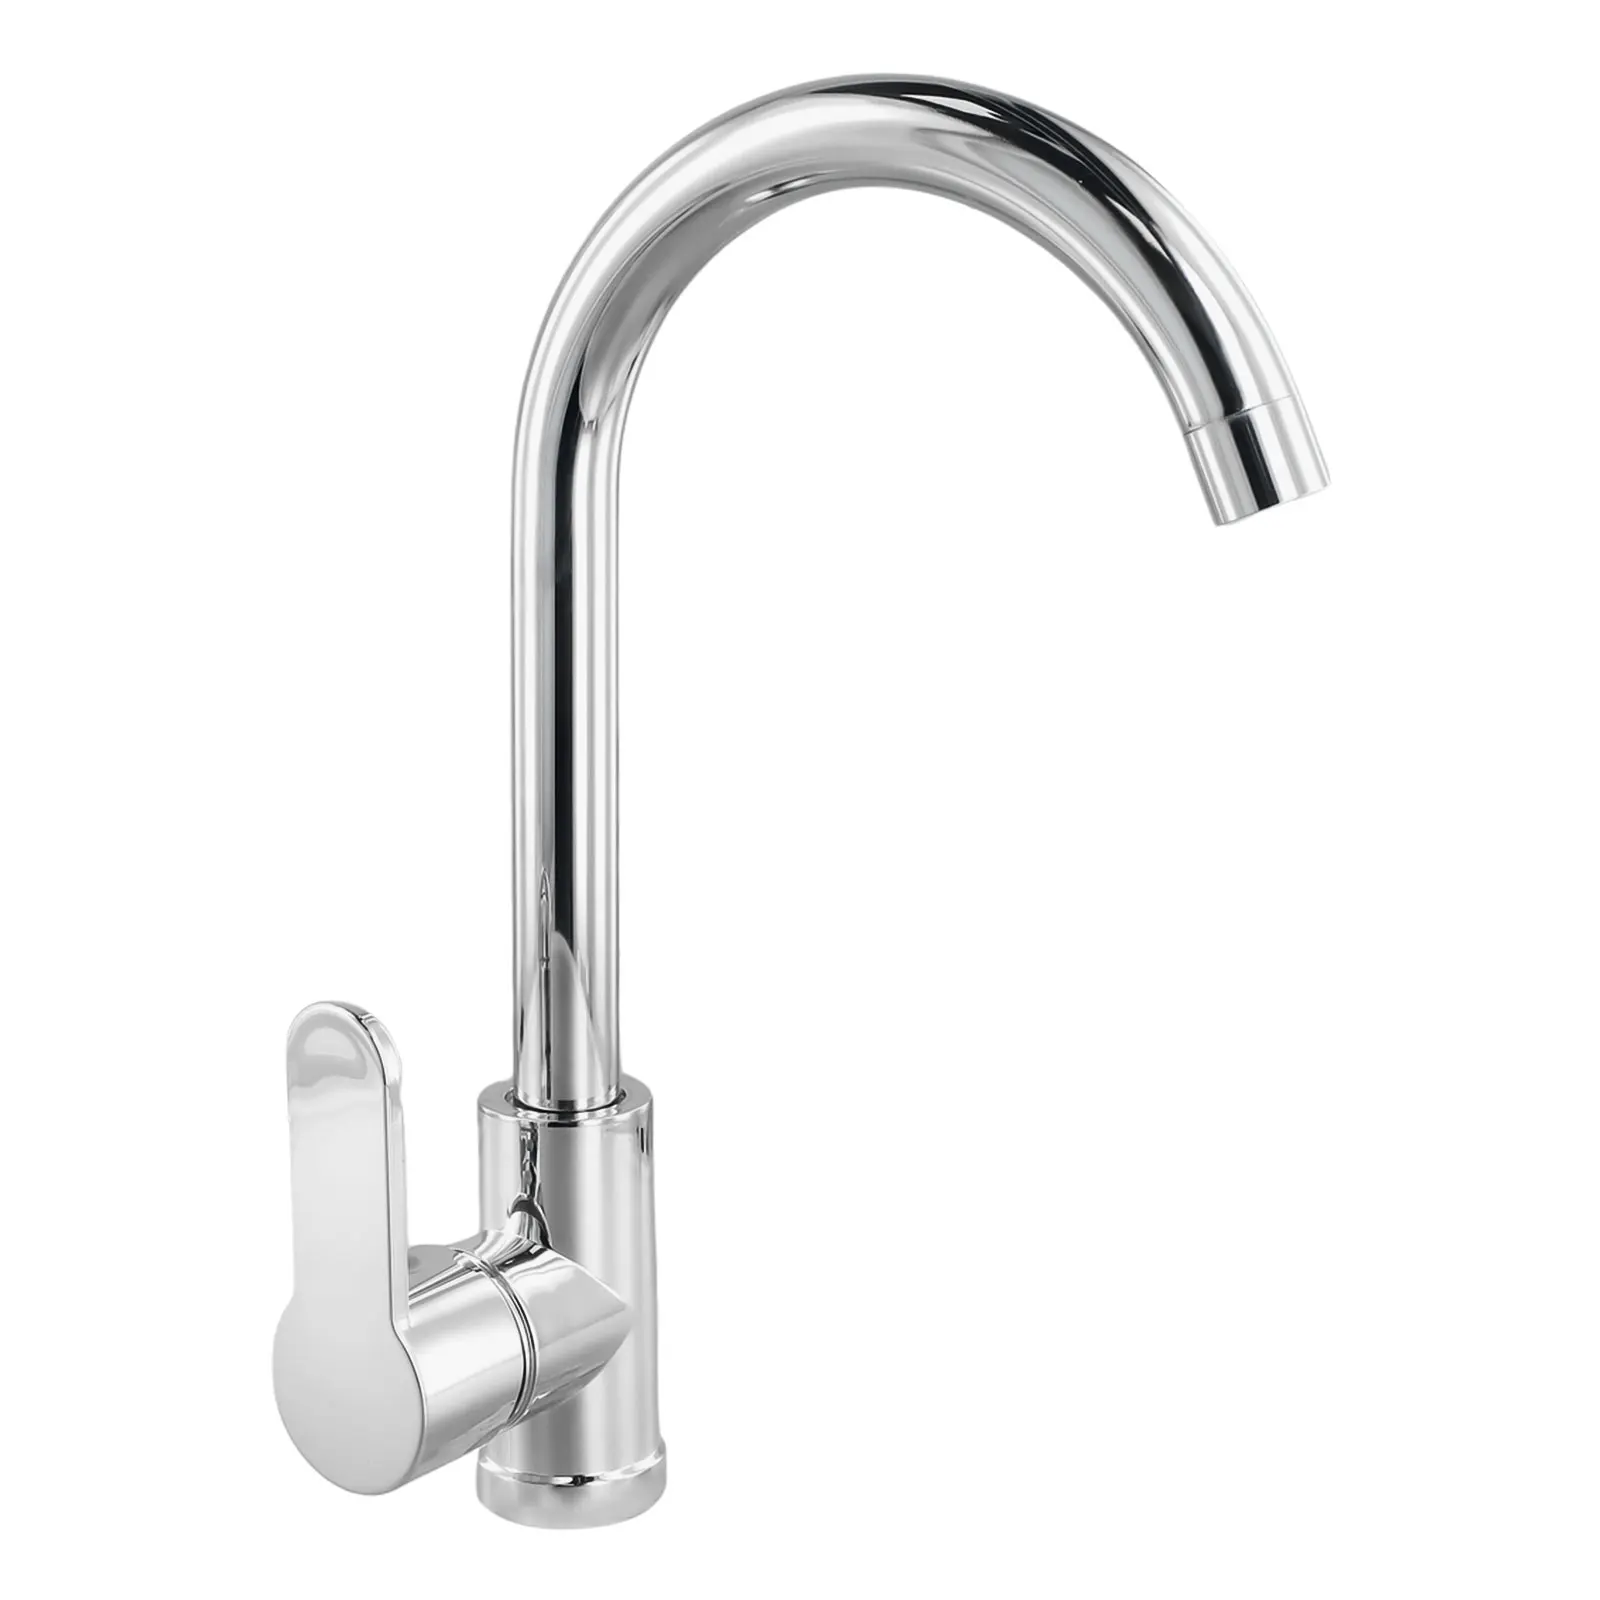 Stainless Steel Kitchen Faucet Polished Chrome Plated Swivel Basin Sink Cold Hot Easy To Operate Mixer Tap faucet hot stainless cold blacked bathroom faucets mixer single free black faucet paint steel hole shipping basin tap faucet sta